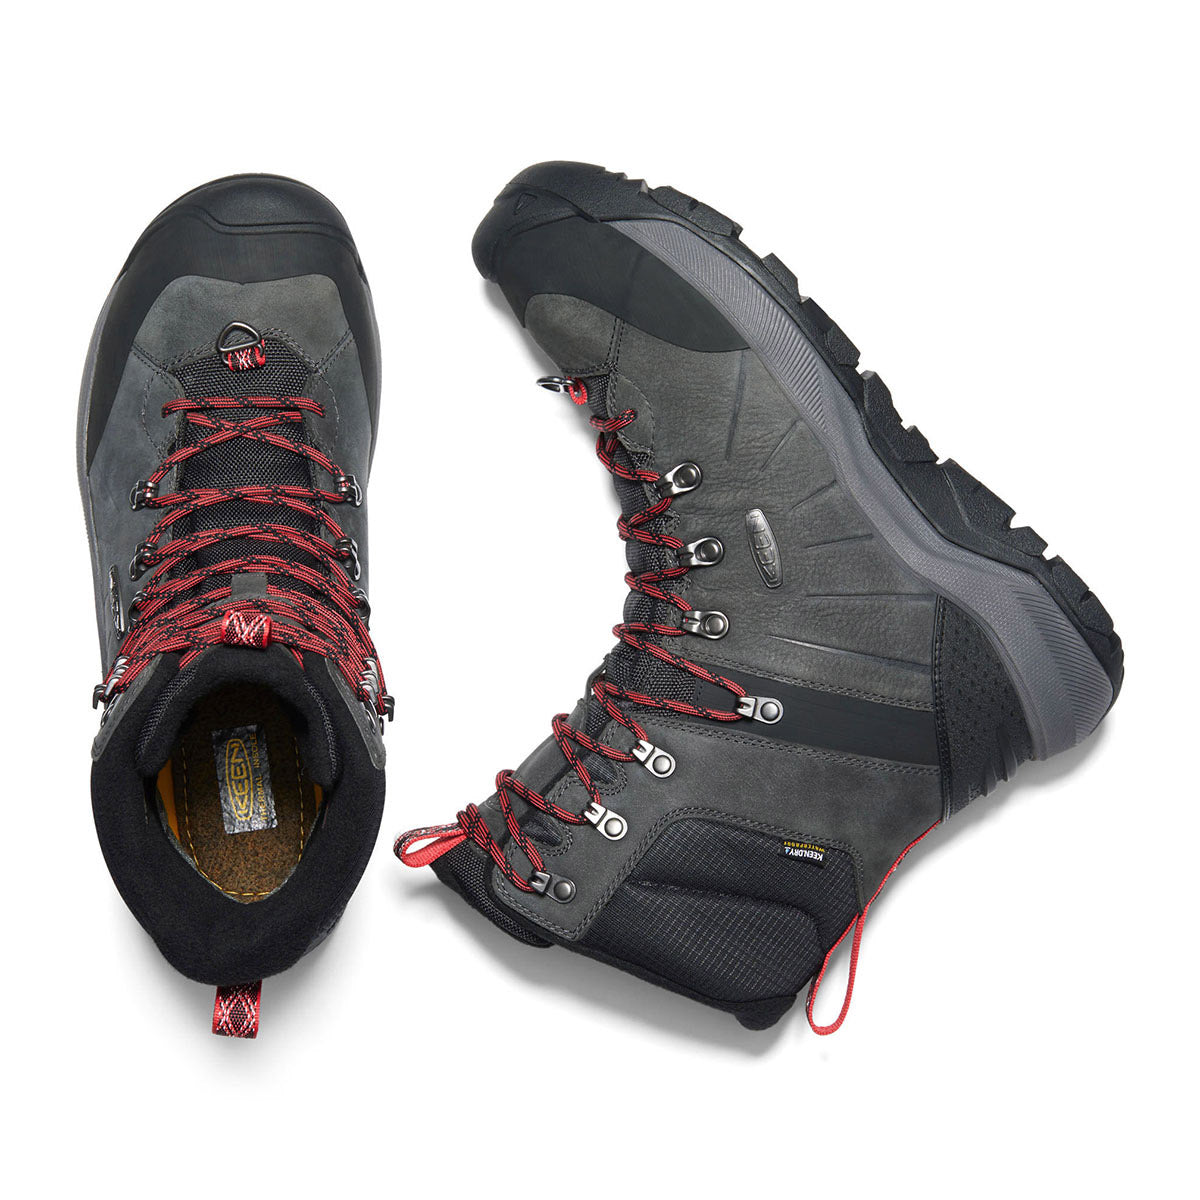 Pair of Keen Revel IV High Polar hiking boots seen from above with one boot inverted showing the interior, including the Thermal Heat Shield insole.